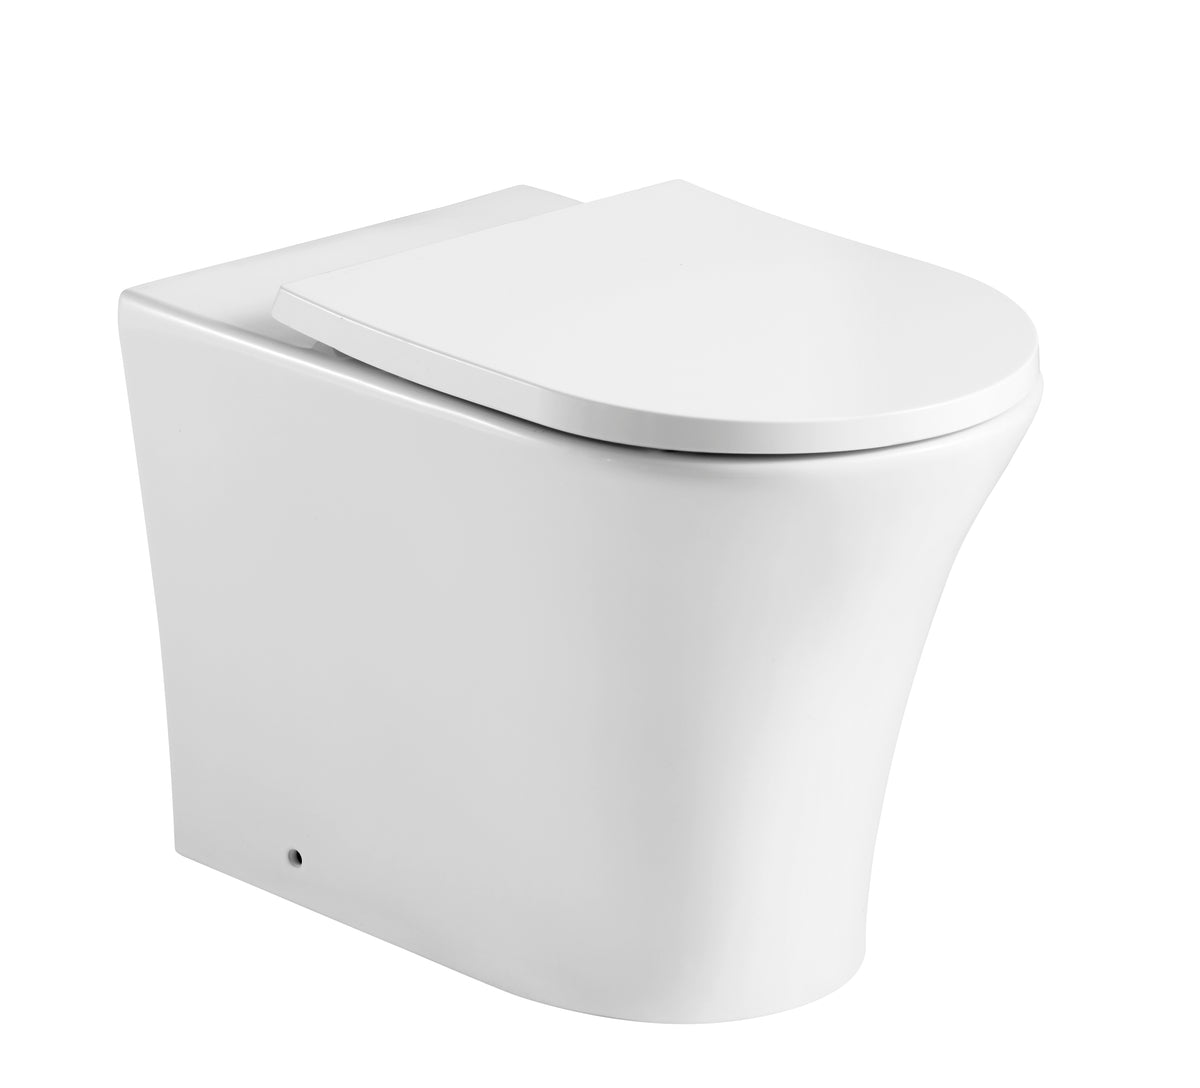 Kameo Back To Wall Pans & Wall Hung Bathroom Furniture: Bath to Shower Conversion